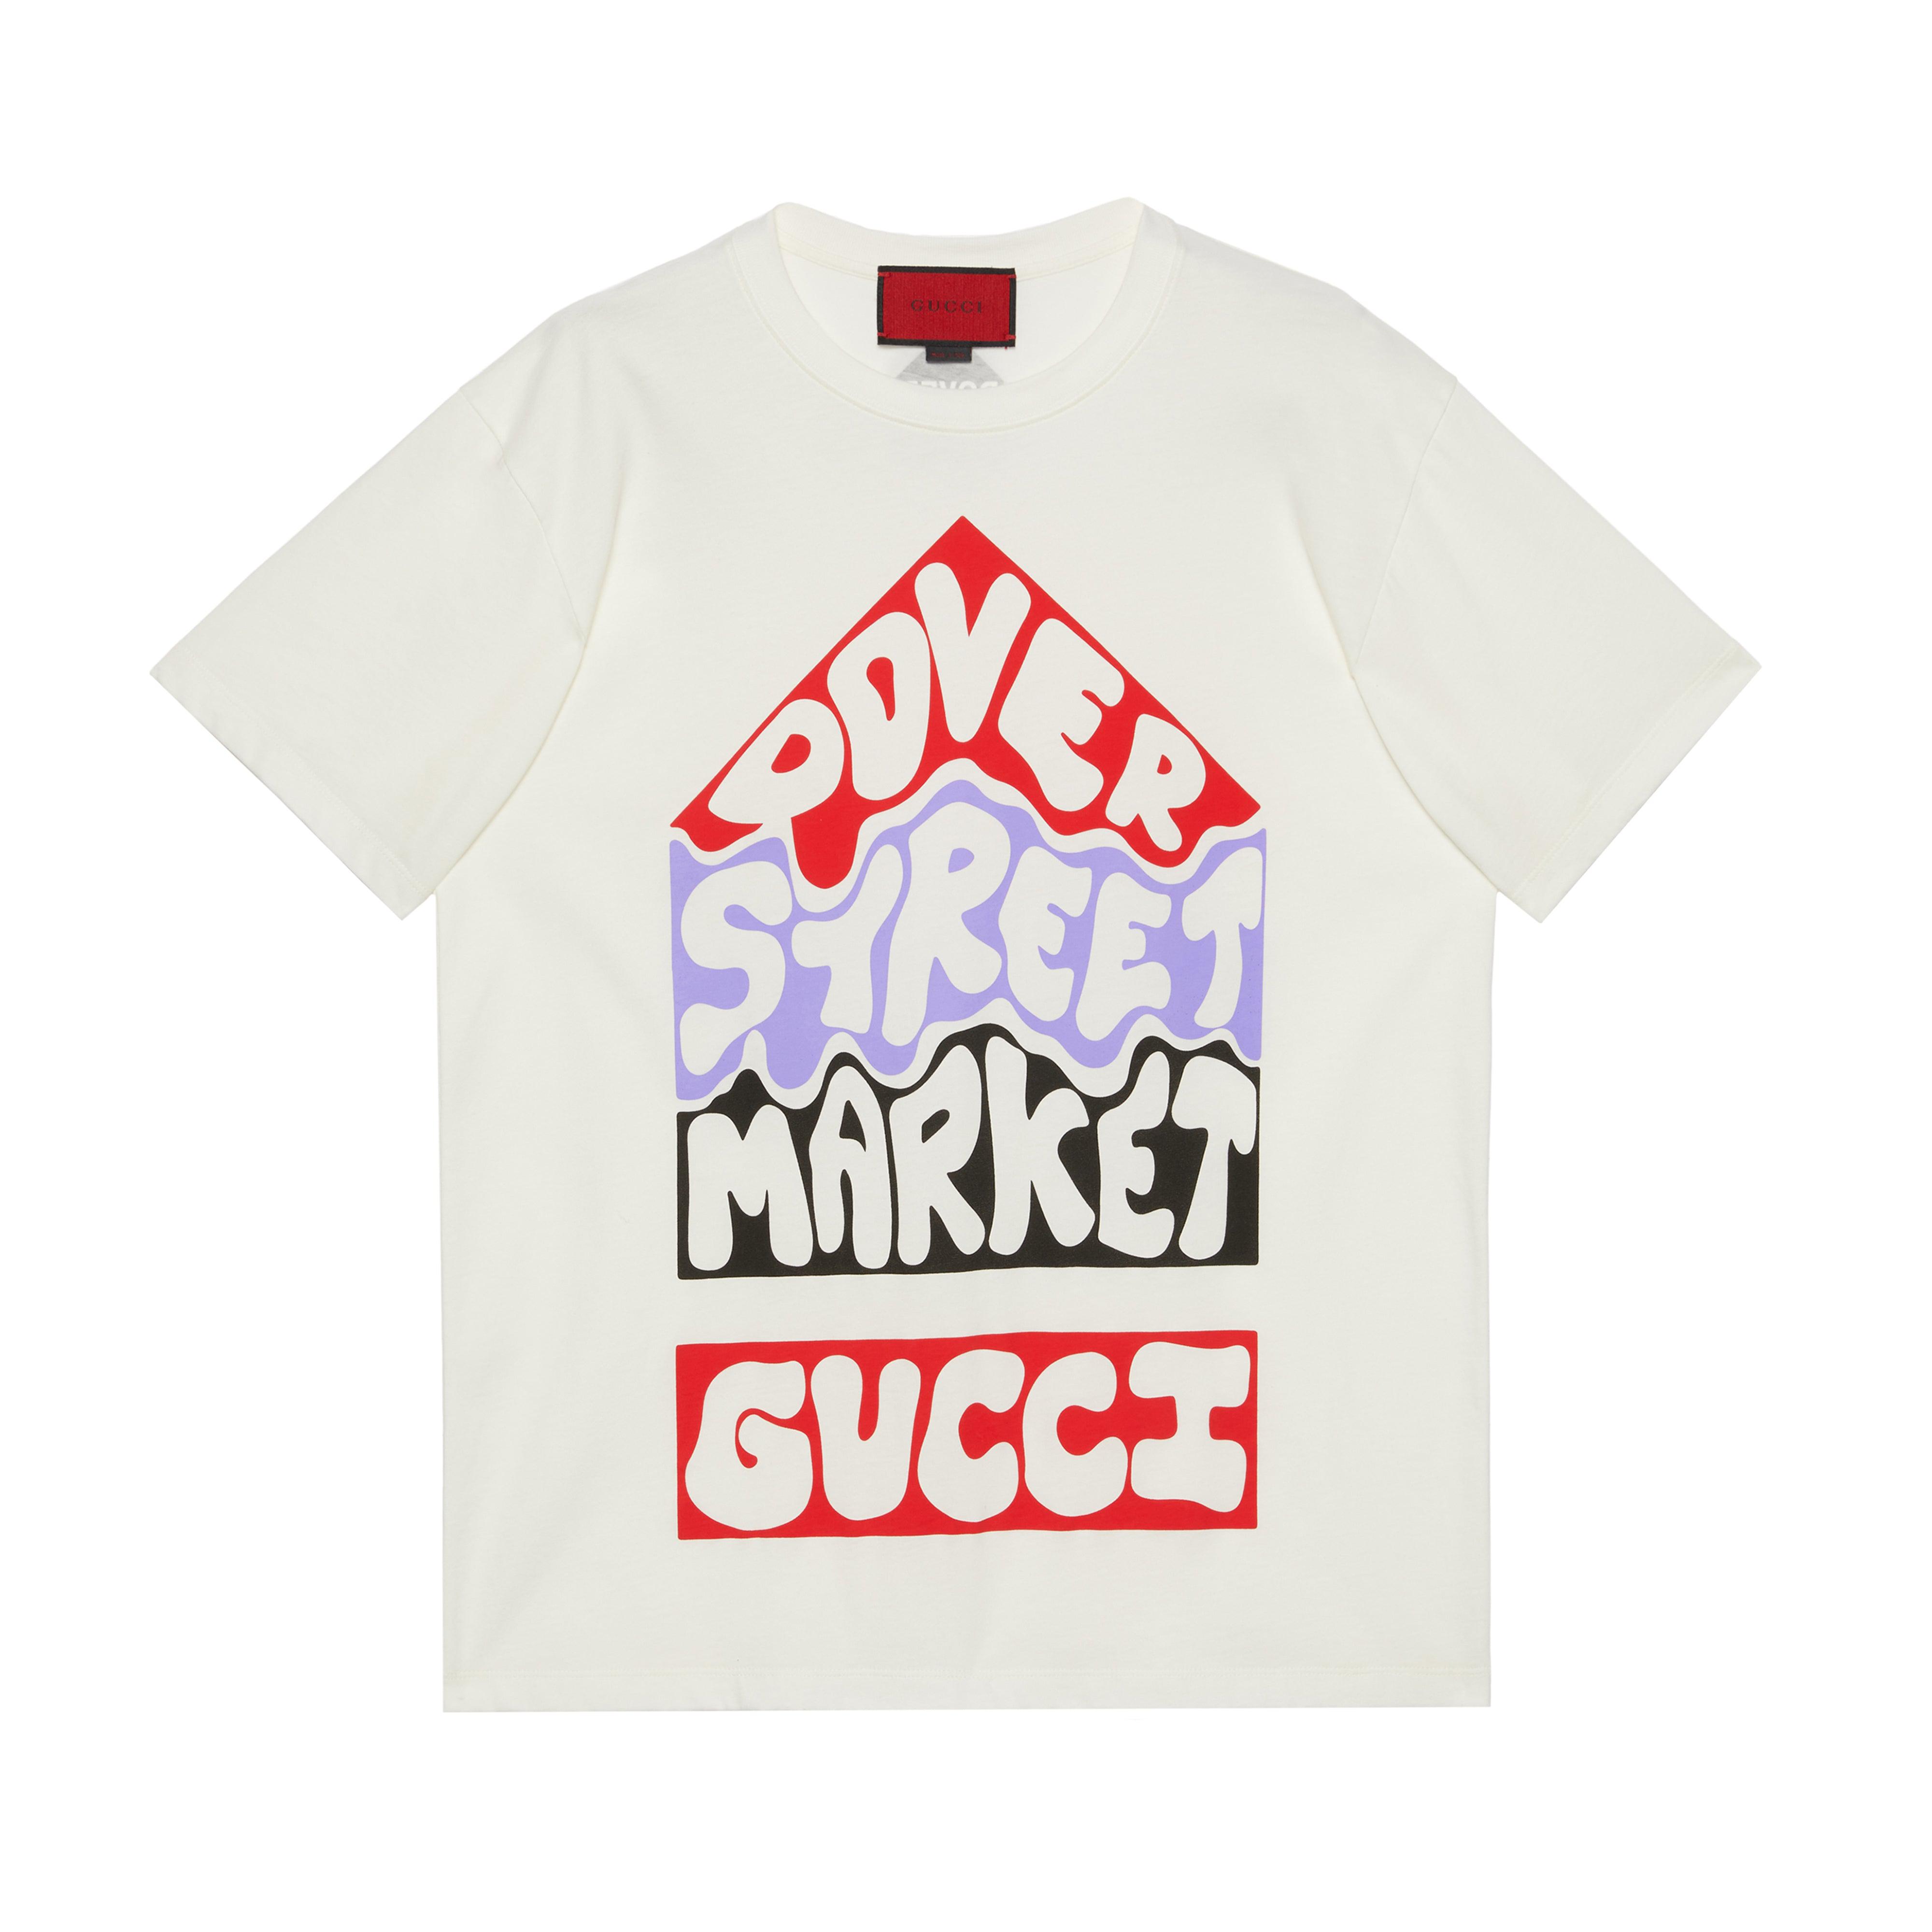 Gucci Women's DSM Exclusive T-Shirt (White) by GUCCI